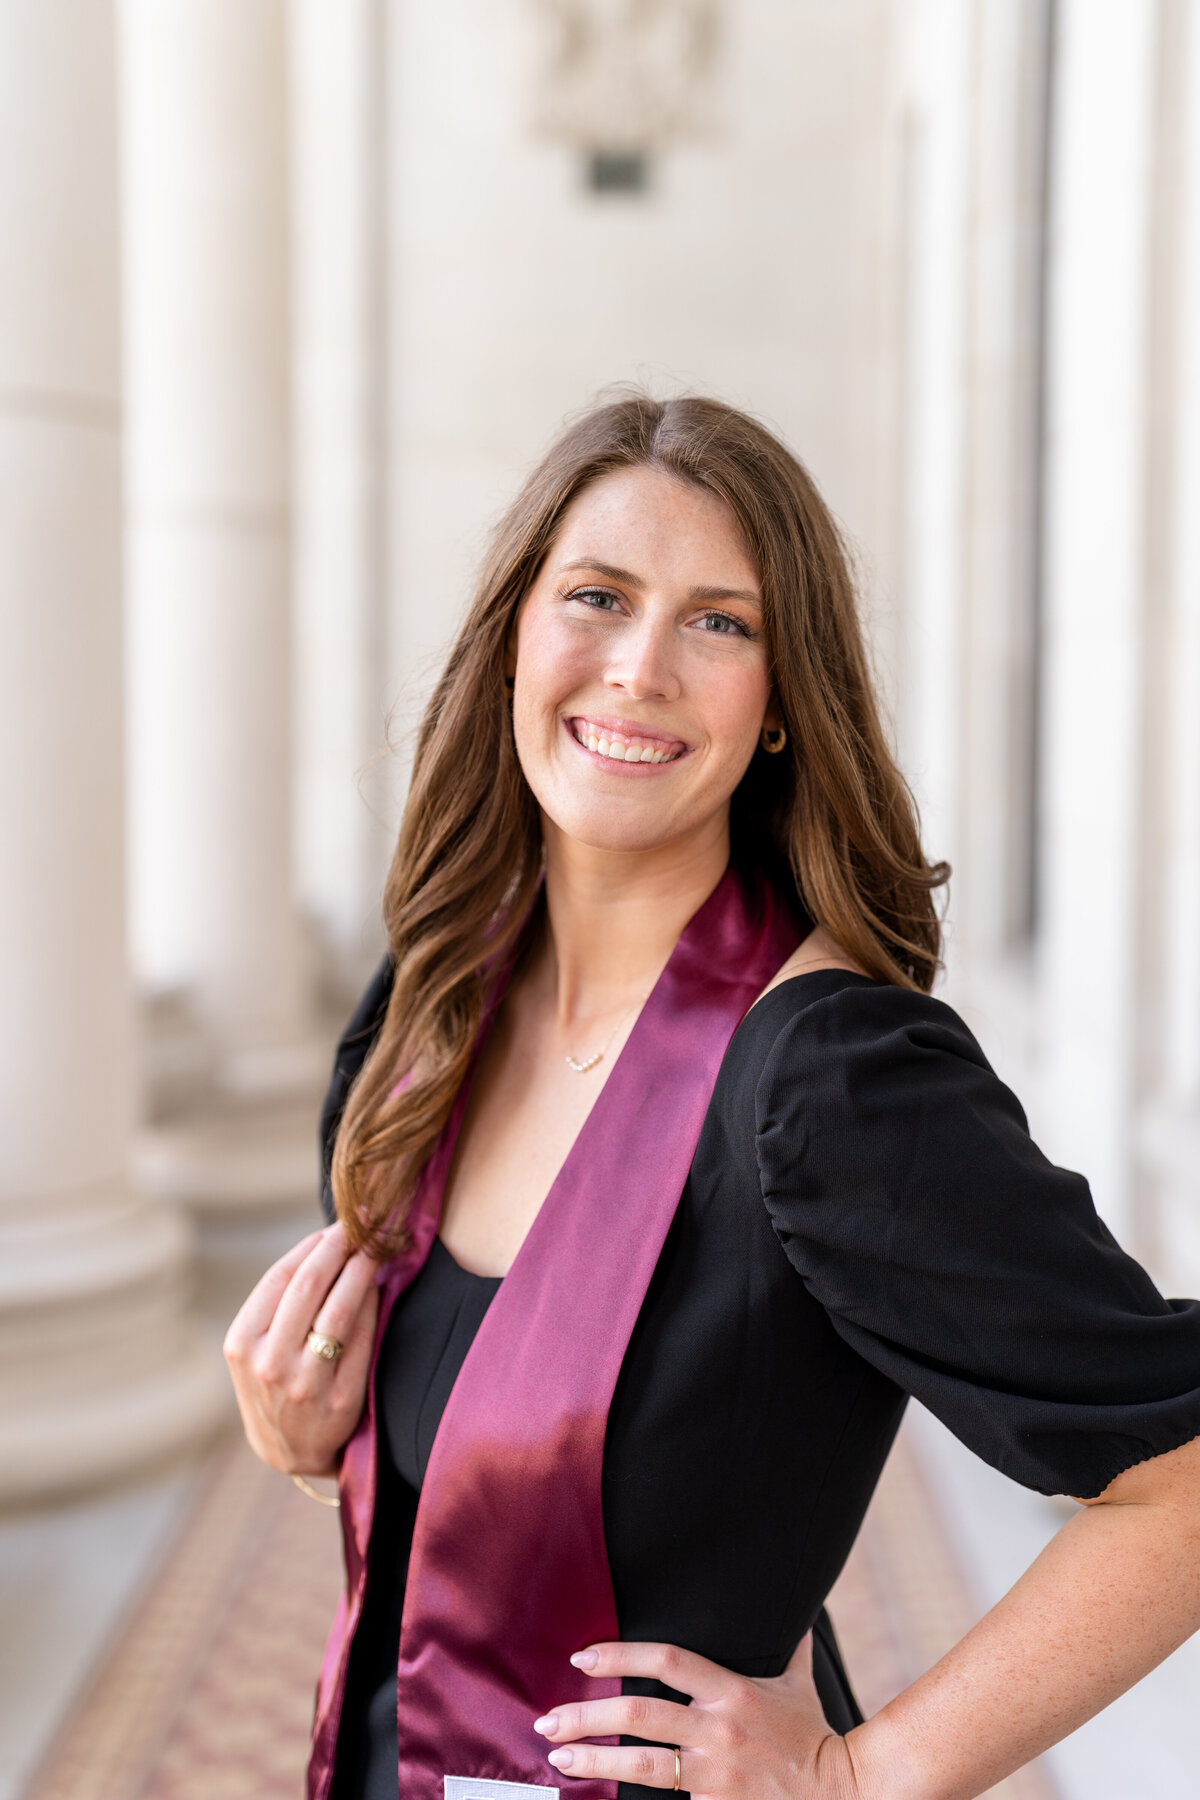 Texas A&M senior girl smiling with hand on hip and other hand touching hair while wearing black dress and Aggie stole in columns of Administration Building